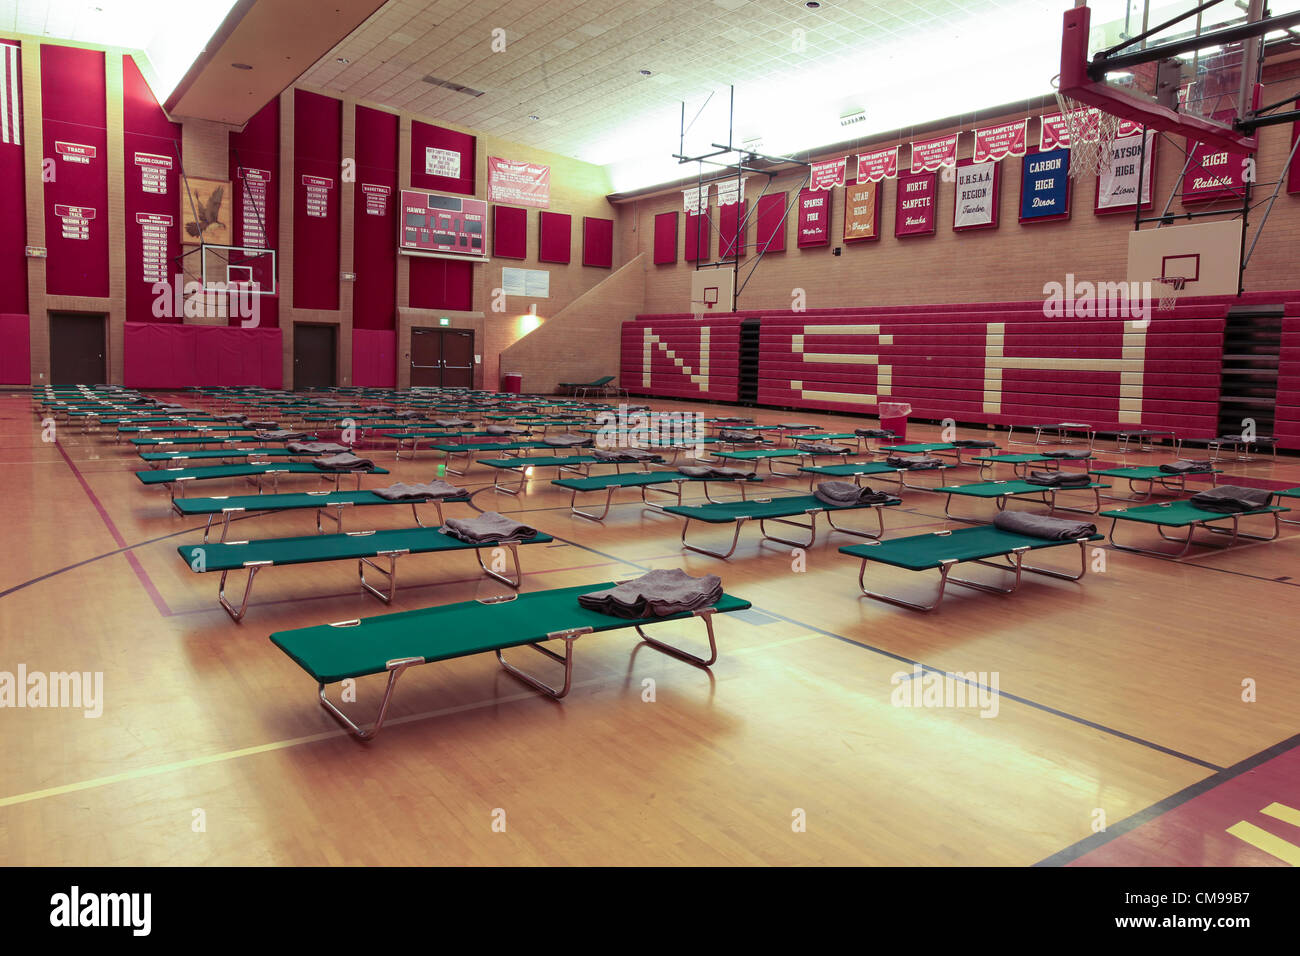 Mount Pleasant, Sanpete County, Utah USA 26 June 2012. Red Cross shelter in high school. Cots and beds for evacuation. Forest wildfire destroys dozens of homes, over 50,000 acres and at least one death by burning. Fire fighters responded from across Utah and several western states to help rescue and extinquish the blaze. Several cities evacuated due to approaching dangers. Briefing before fighting the fire. Destroyed mountain landscape and homes. Largest fire so far this year in Utah. Millions of dollars cost. Stock Photo